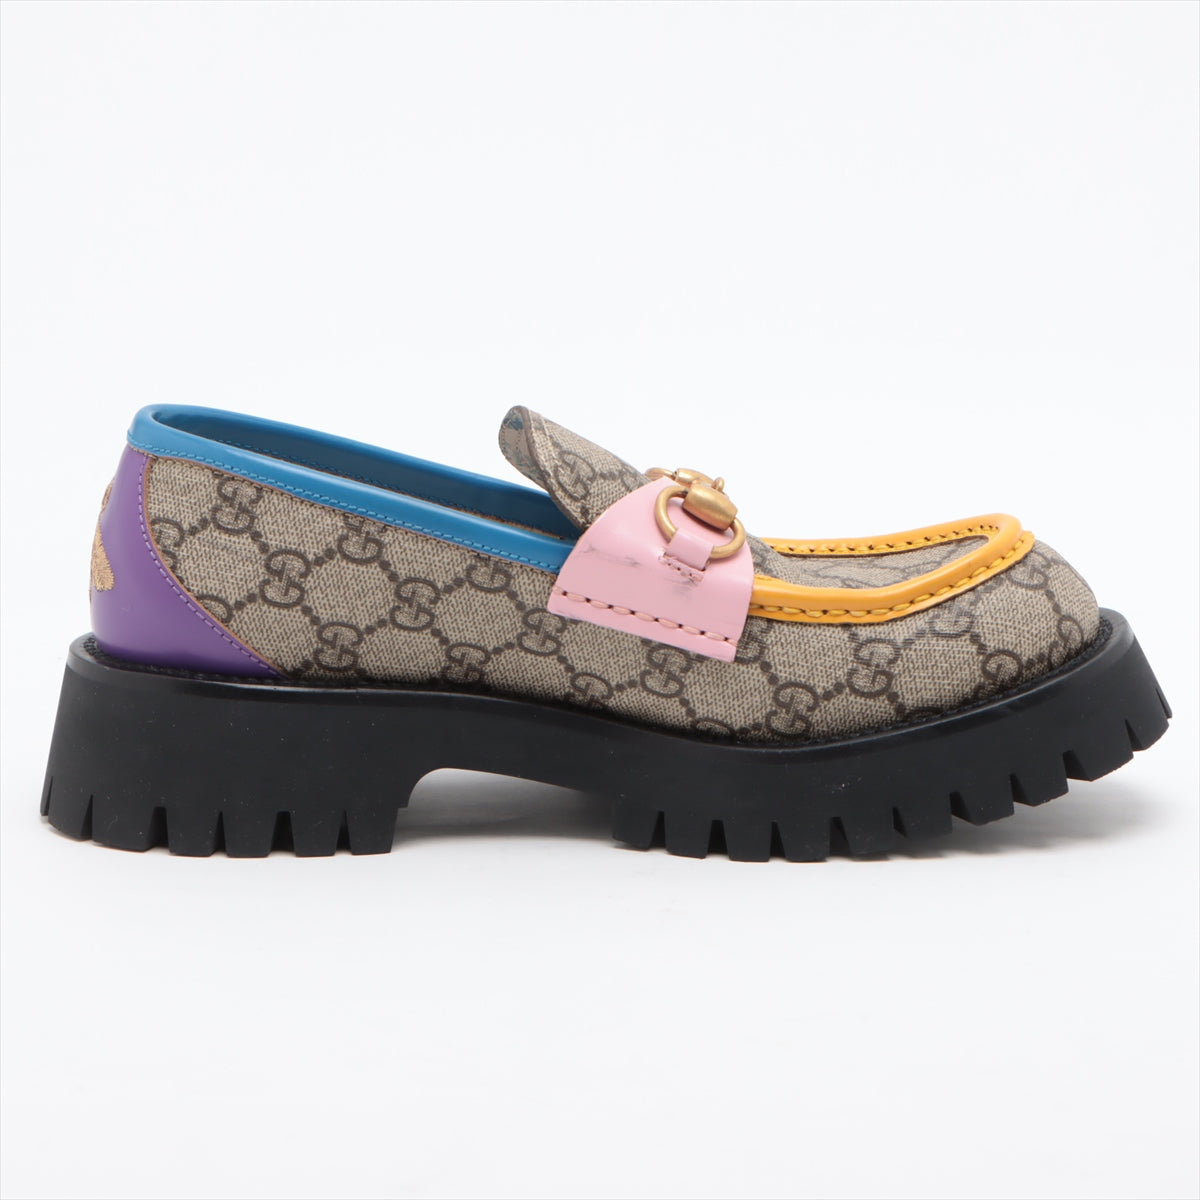 Gucci PVC & leather Loafer 38 Ladies' Multicolor 727170 GG Supreme There are frayed straps